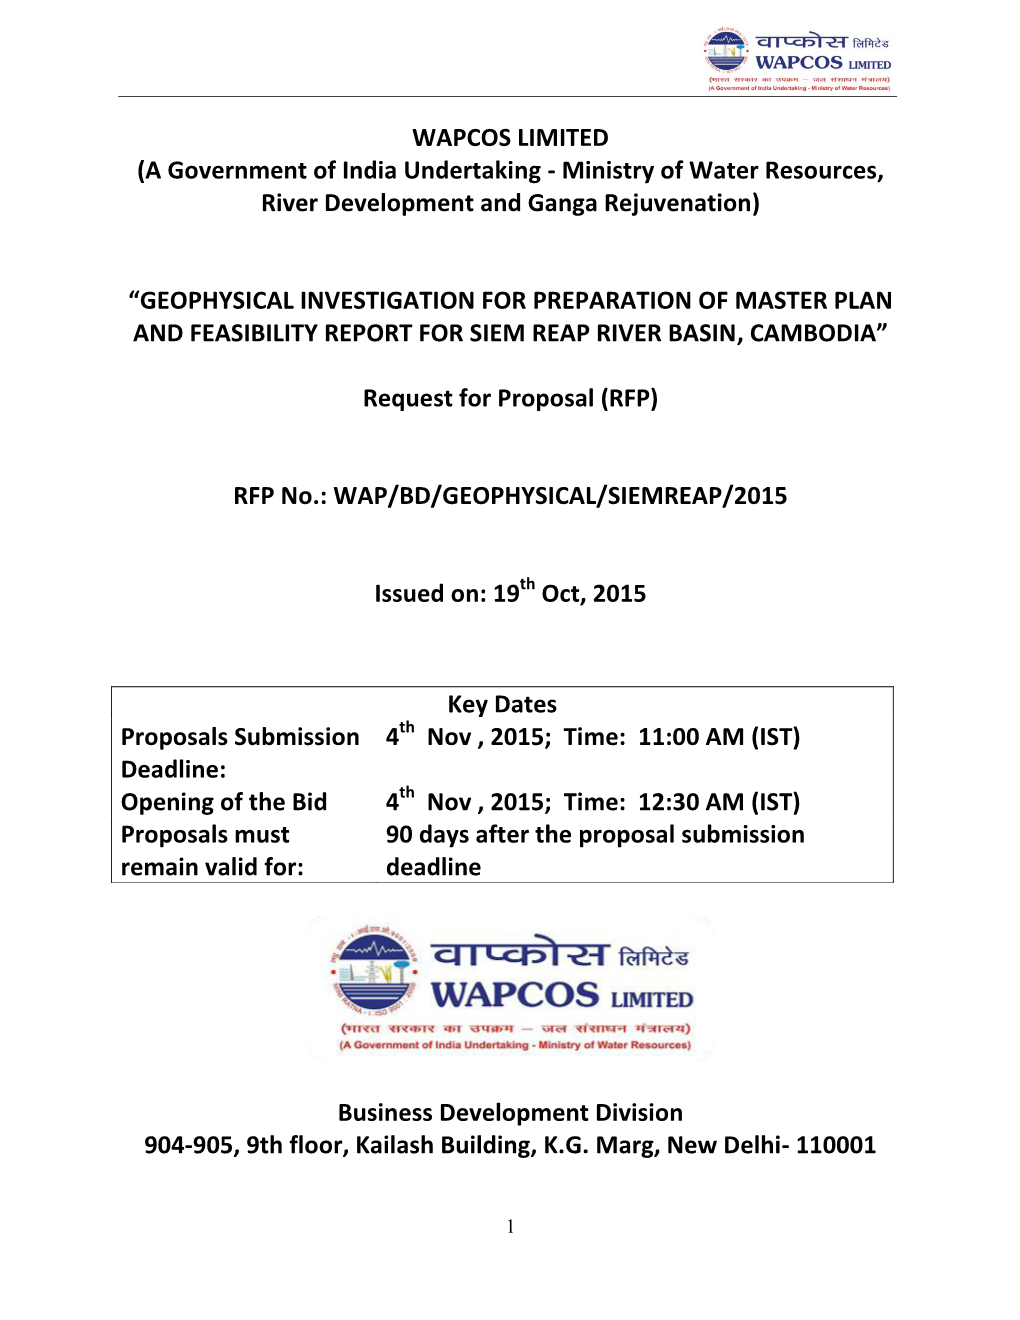 WAPCOS LIMITED (A Government of India Undertaking - Ministry of Water Resources, River Development and Ganga Rejuvenation)